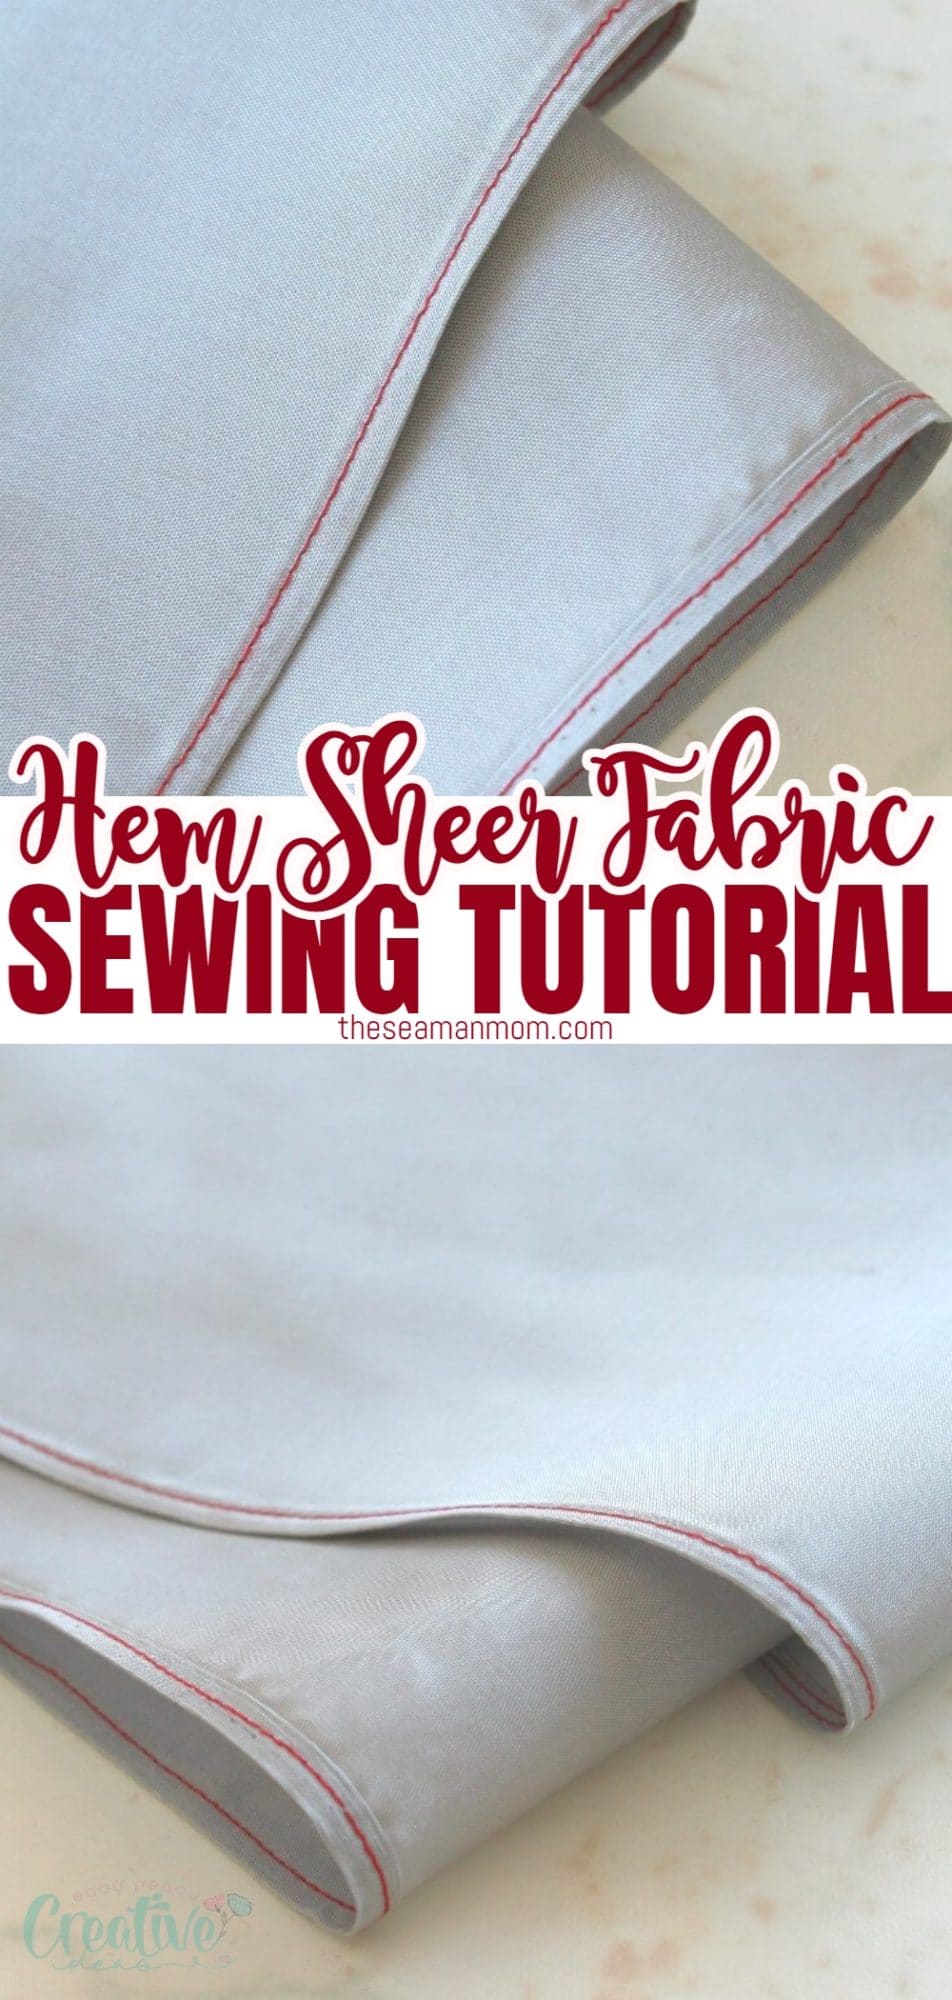 Photo collage of a hem on lightweight fabric illustrated in a sewing tutorial on how to hem sheer fabric